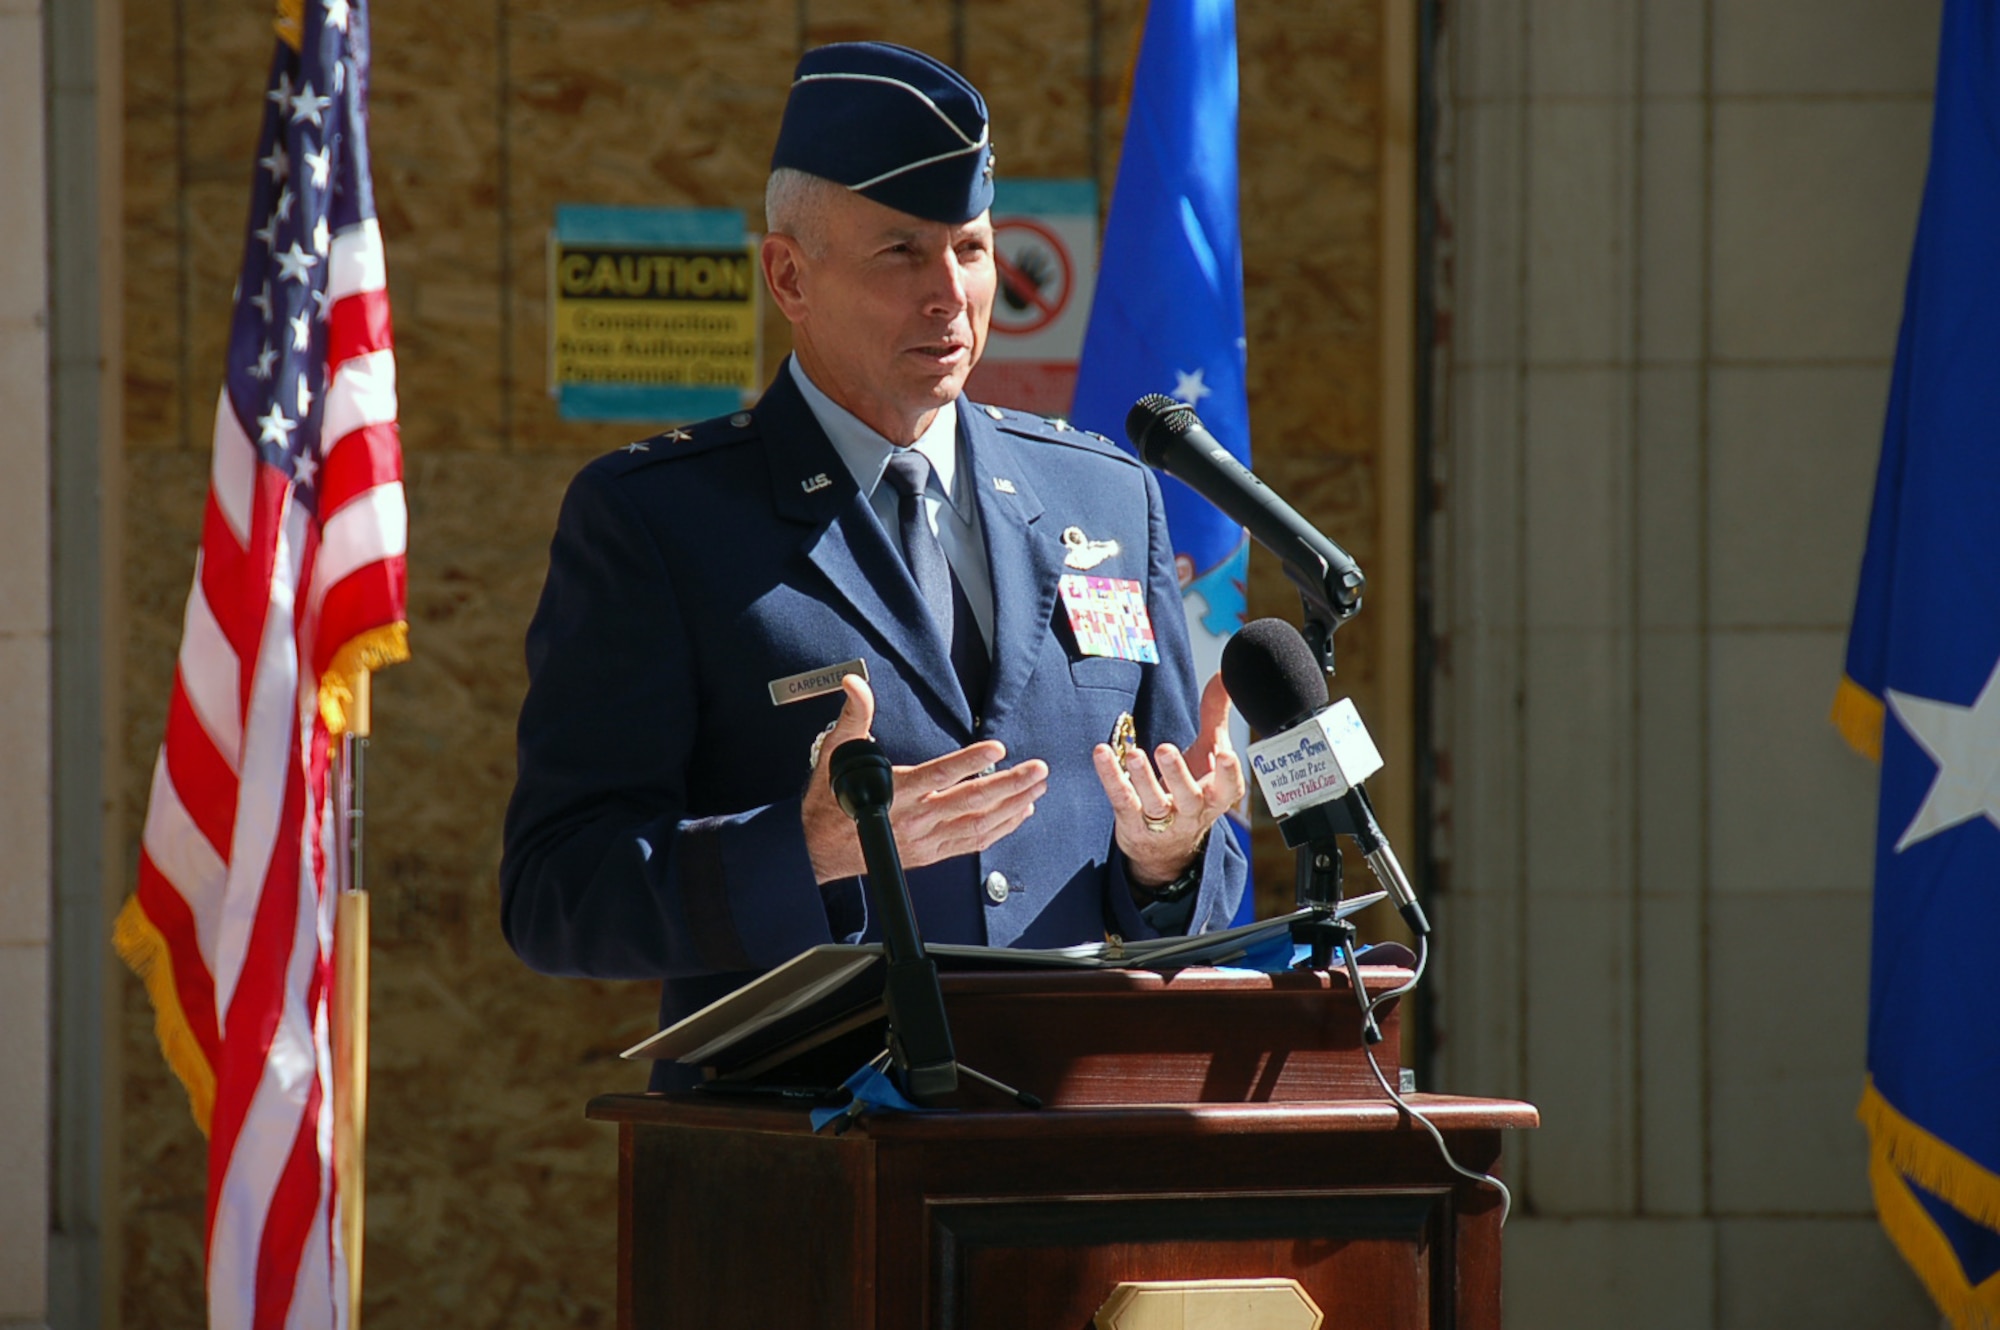 BARKSDALE AIR FORCE BASE, La. – Maj. Gen. Floyd Carpenter, Eighth Air Force commander, speaks during the groundbreaking ceremony on the $25 million renovation to the new Eighth Air Force Headquarters building on Barksdale Air Force Base Oct. 4. The renovation project covers more than 77,000 square feet of office space. Once completed, the headquarters will be equipped with the modern, state-of-the-art communications and information security systems needed to support one of our nation’s most important missions – the mission of nuclear deterrence and global strike operations. (U.S. Air Force photo by Staff Sgt. Brian Stives)